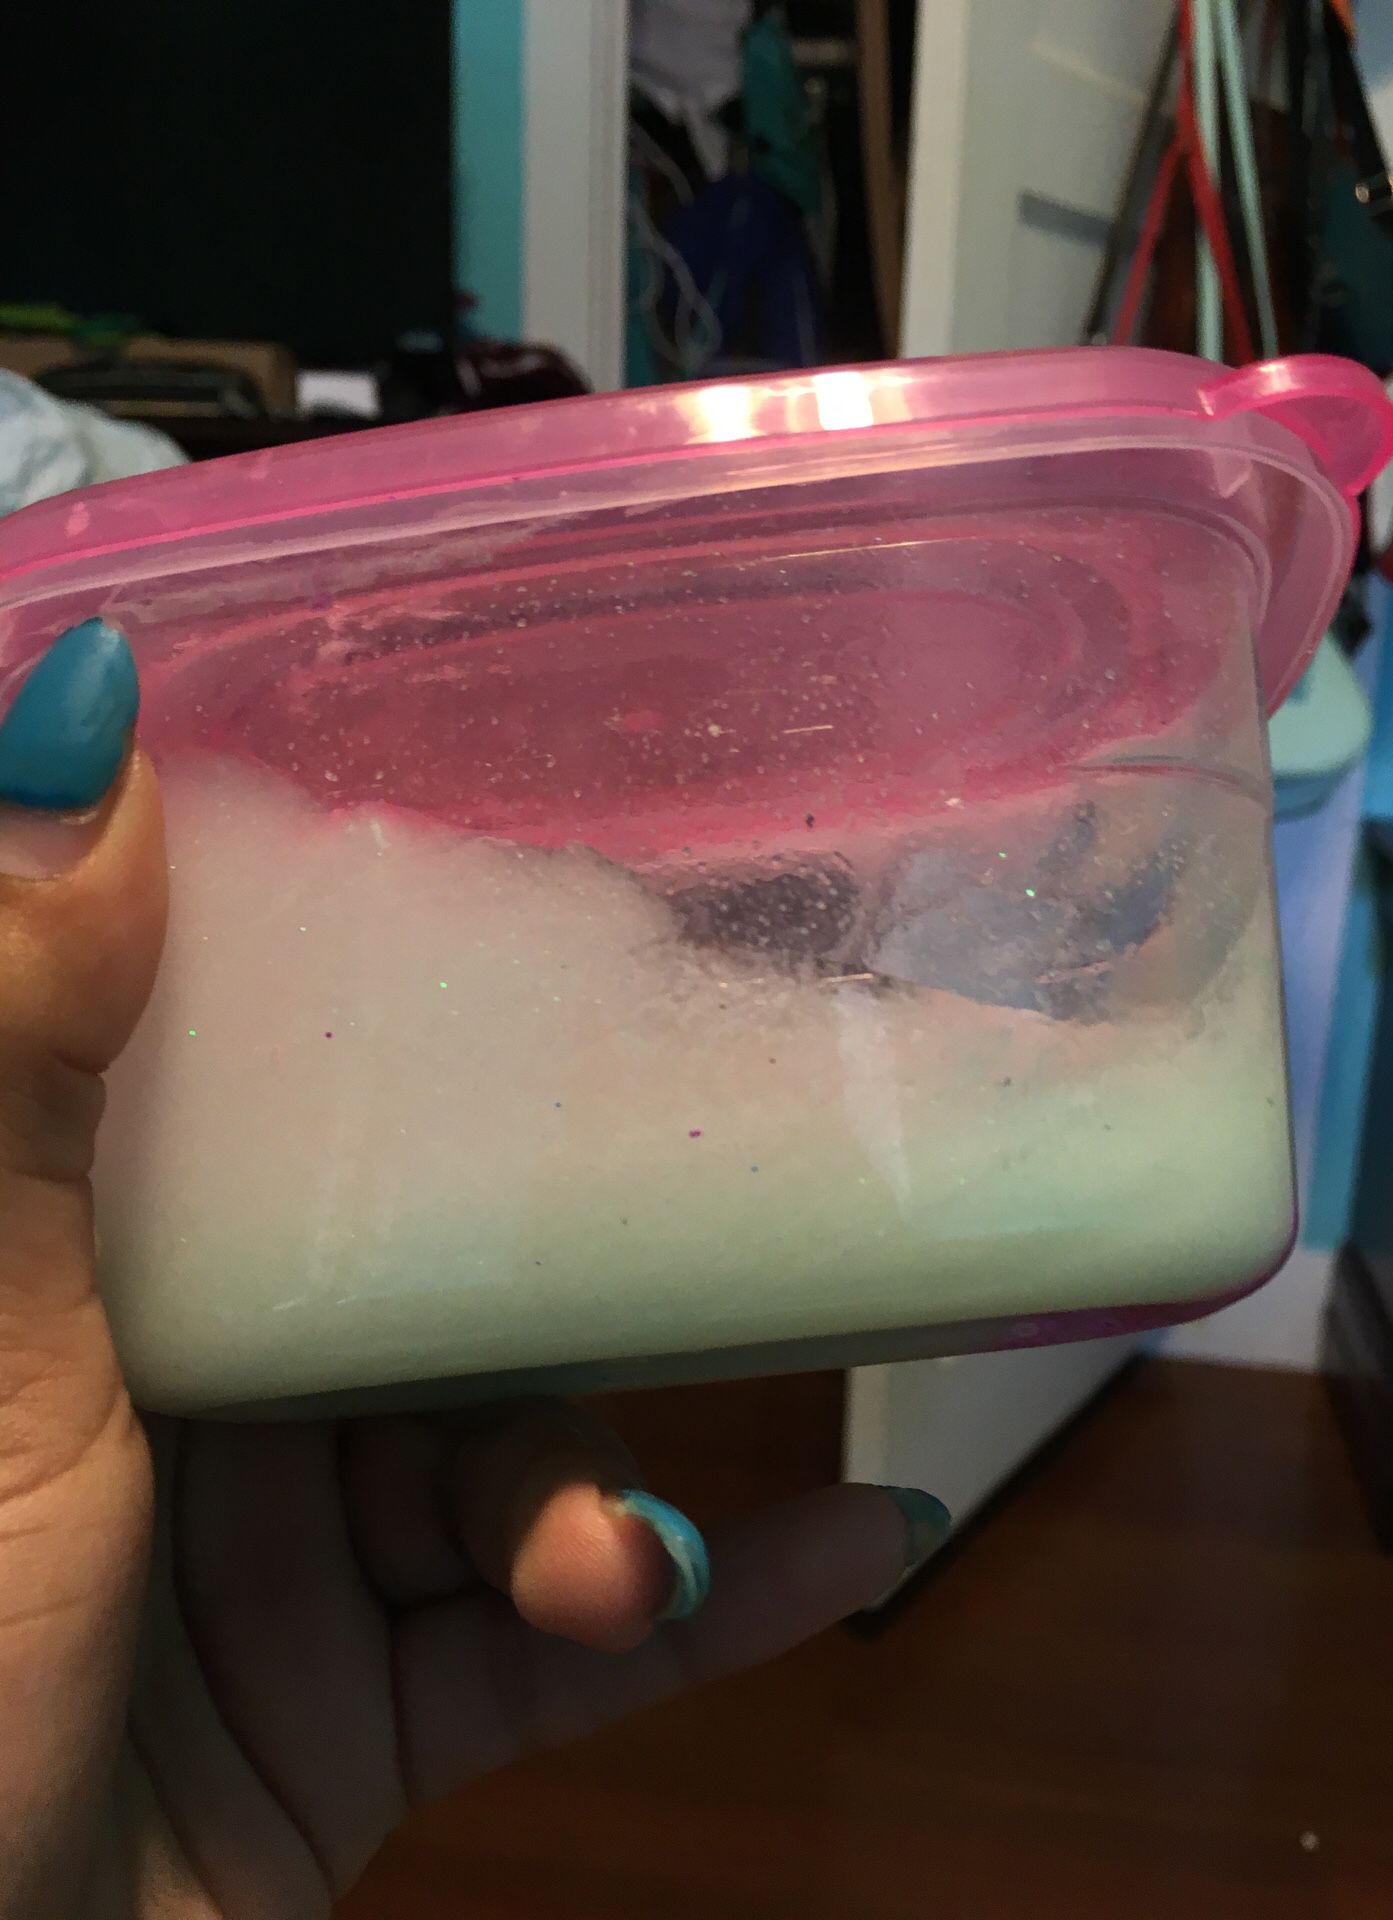 Large glitter glow-in-the-dark slime with beads